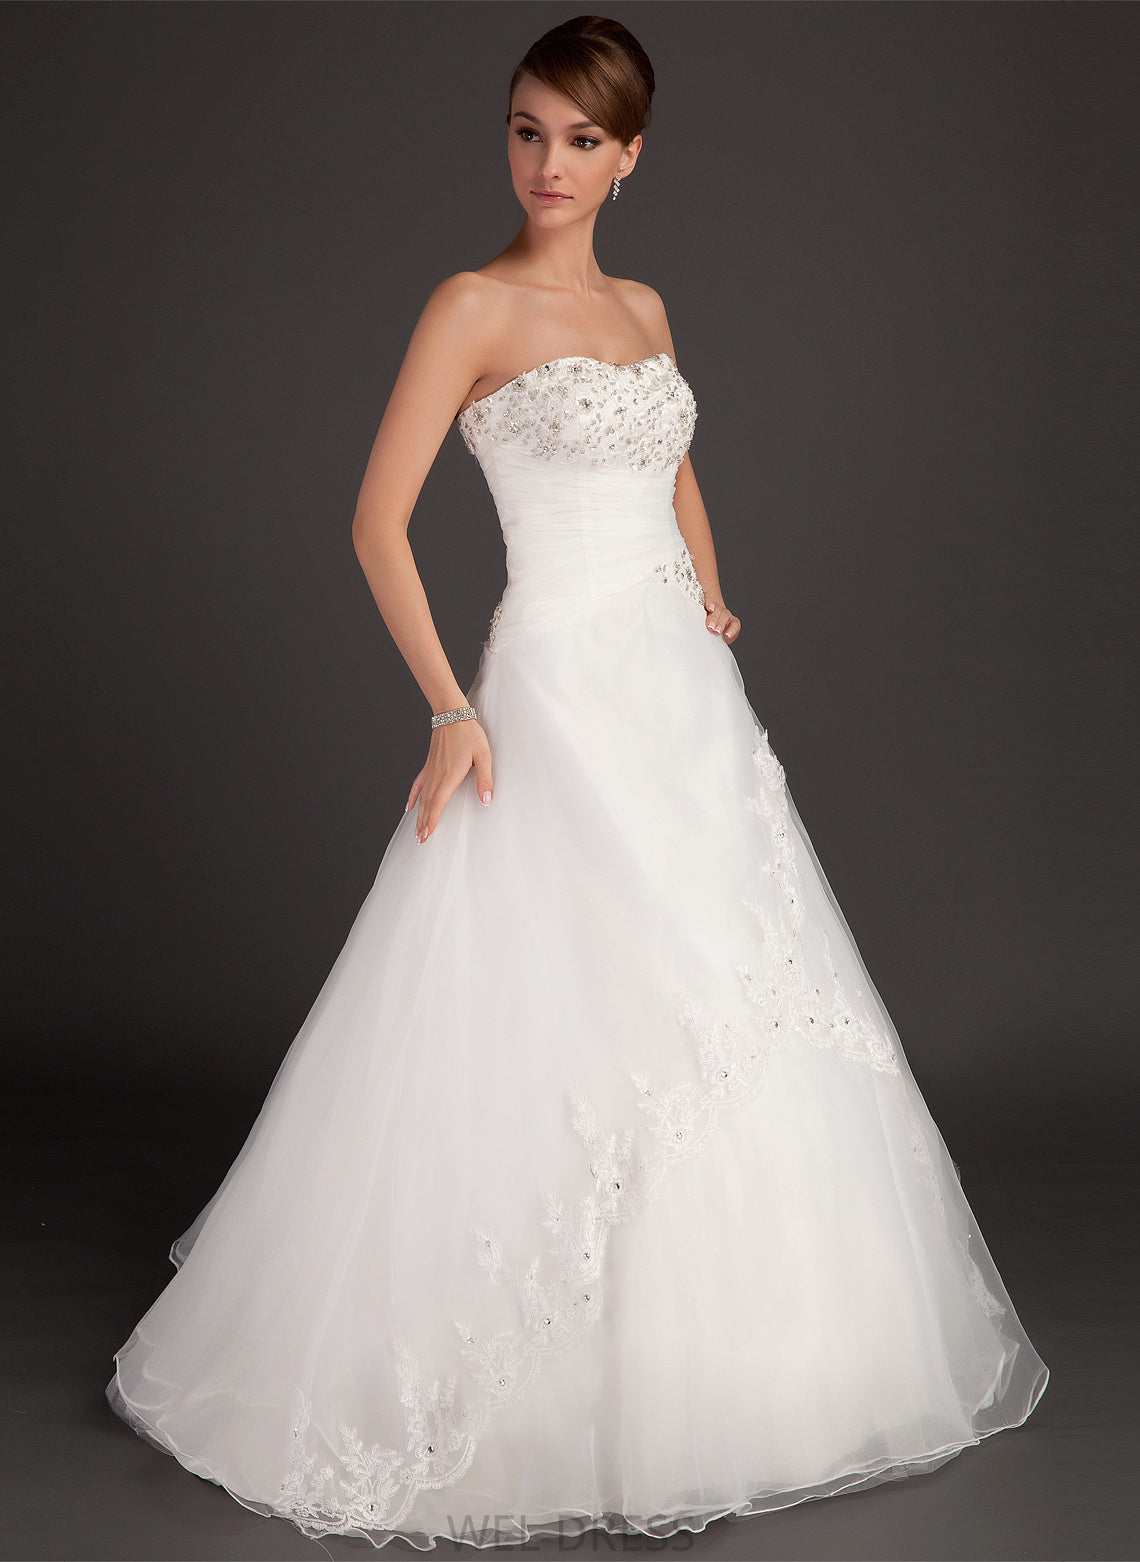 With Satin Ball-Gown/Princess Ruffle Wedding Beading Lace Organza Floor-Length Frederica Sweetheart Wedding Dresses Dress